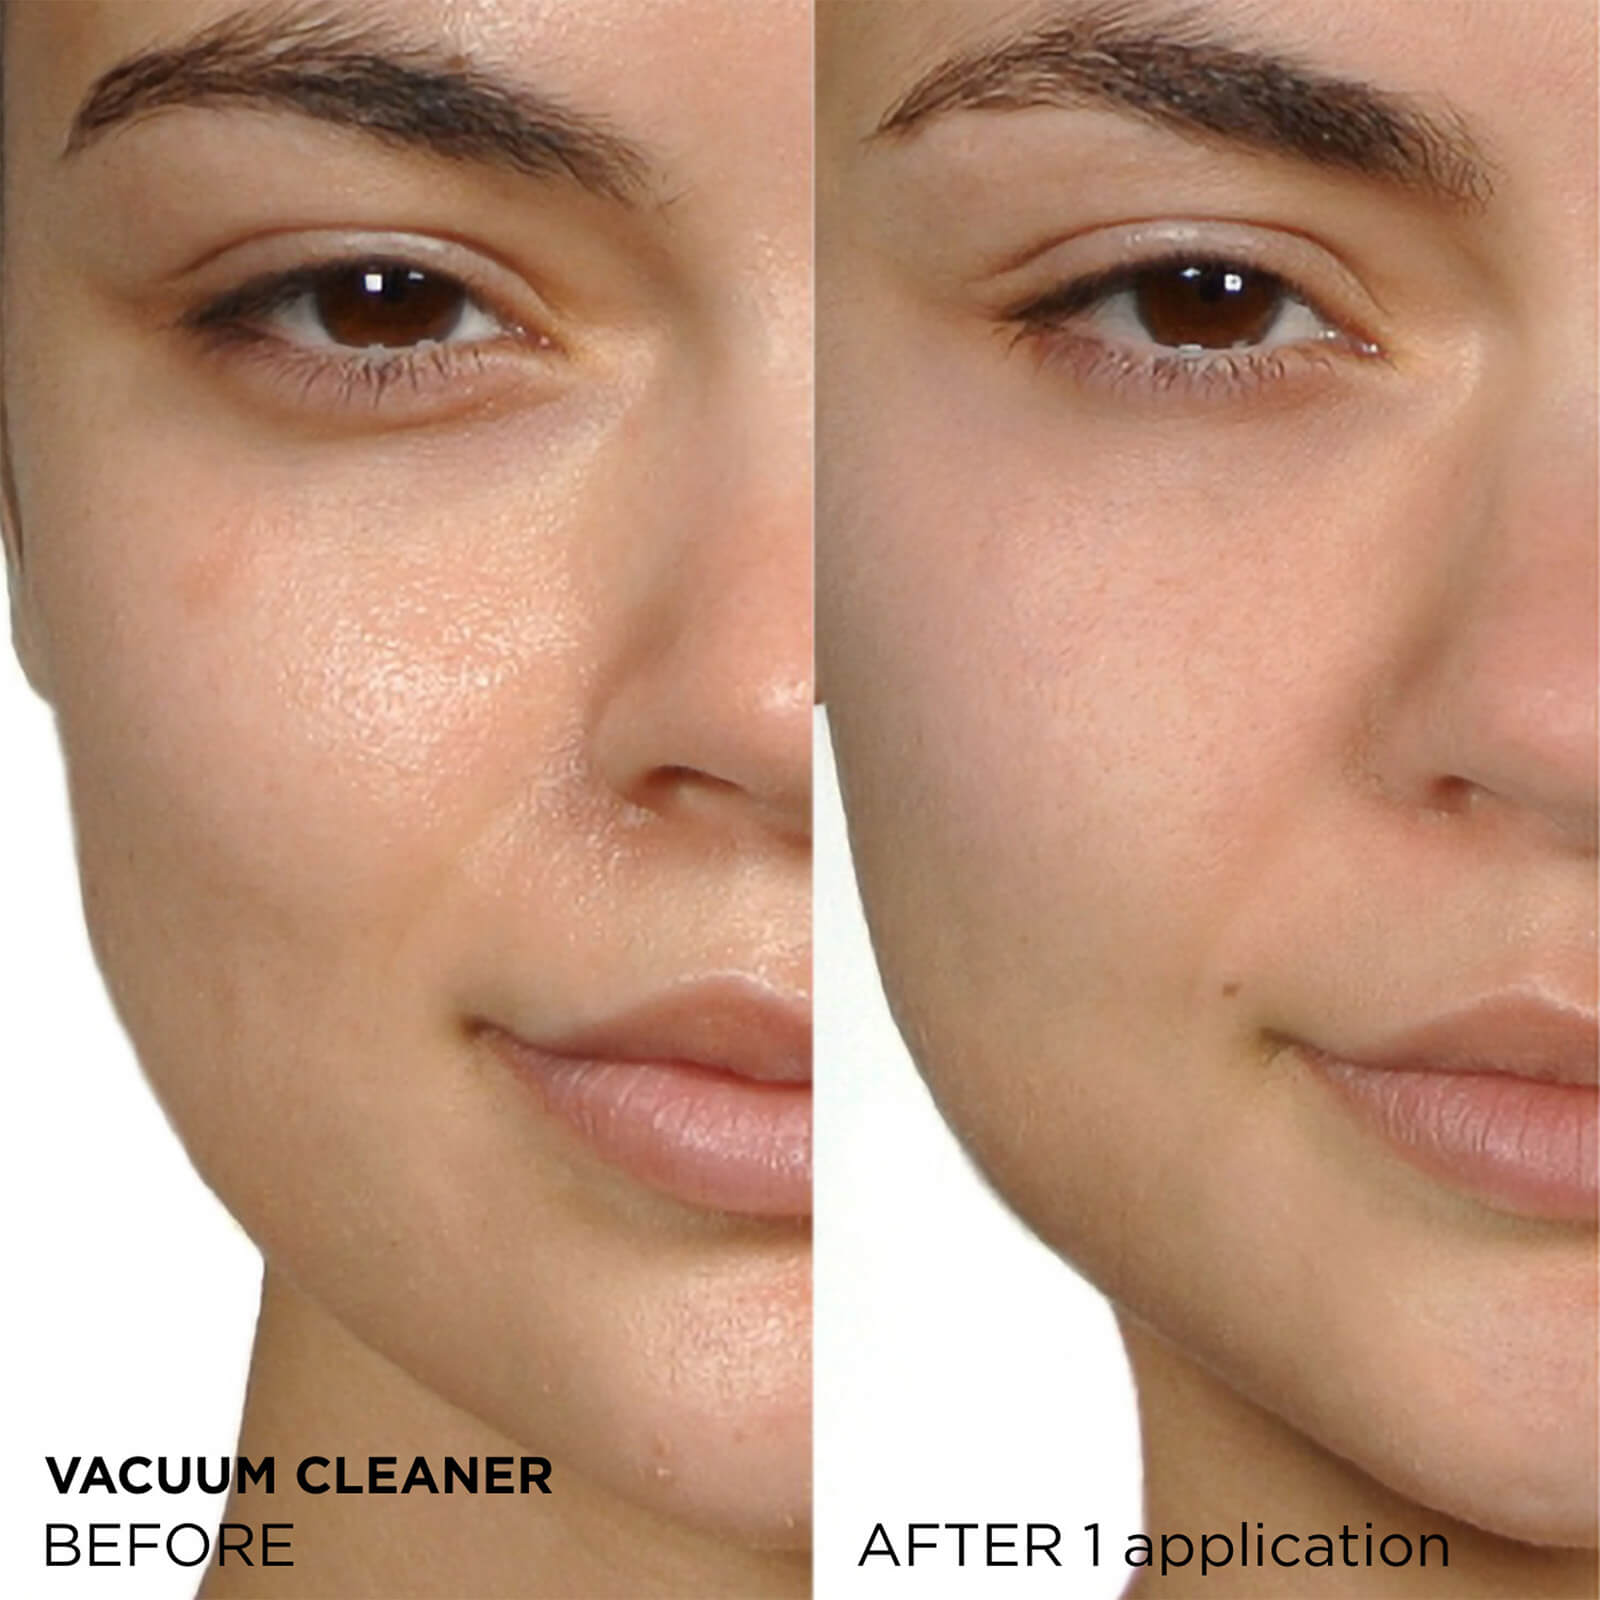 vacuum cleaner, before. after 1 application